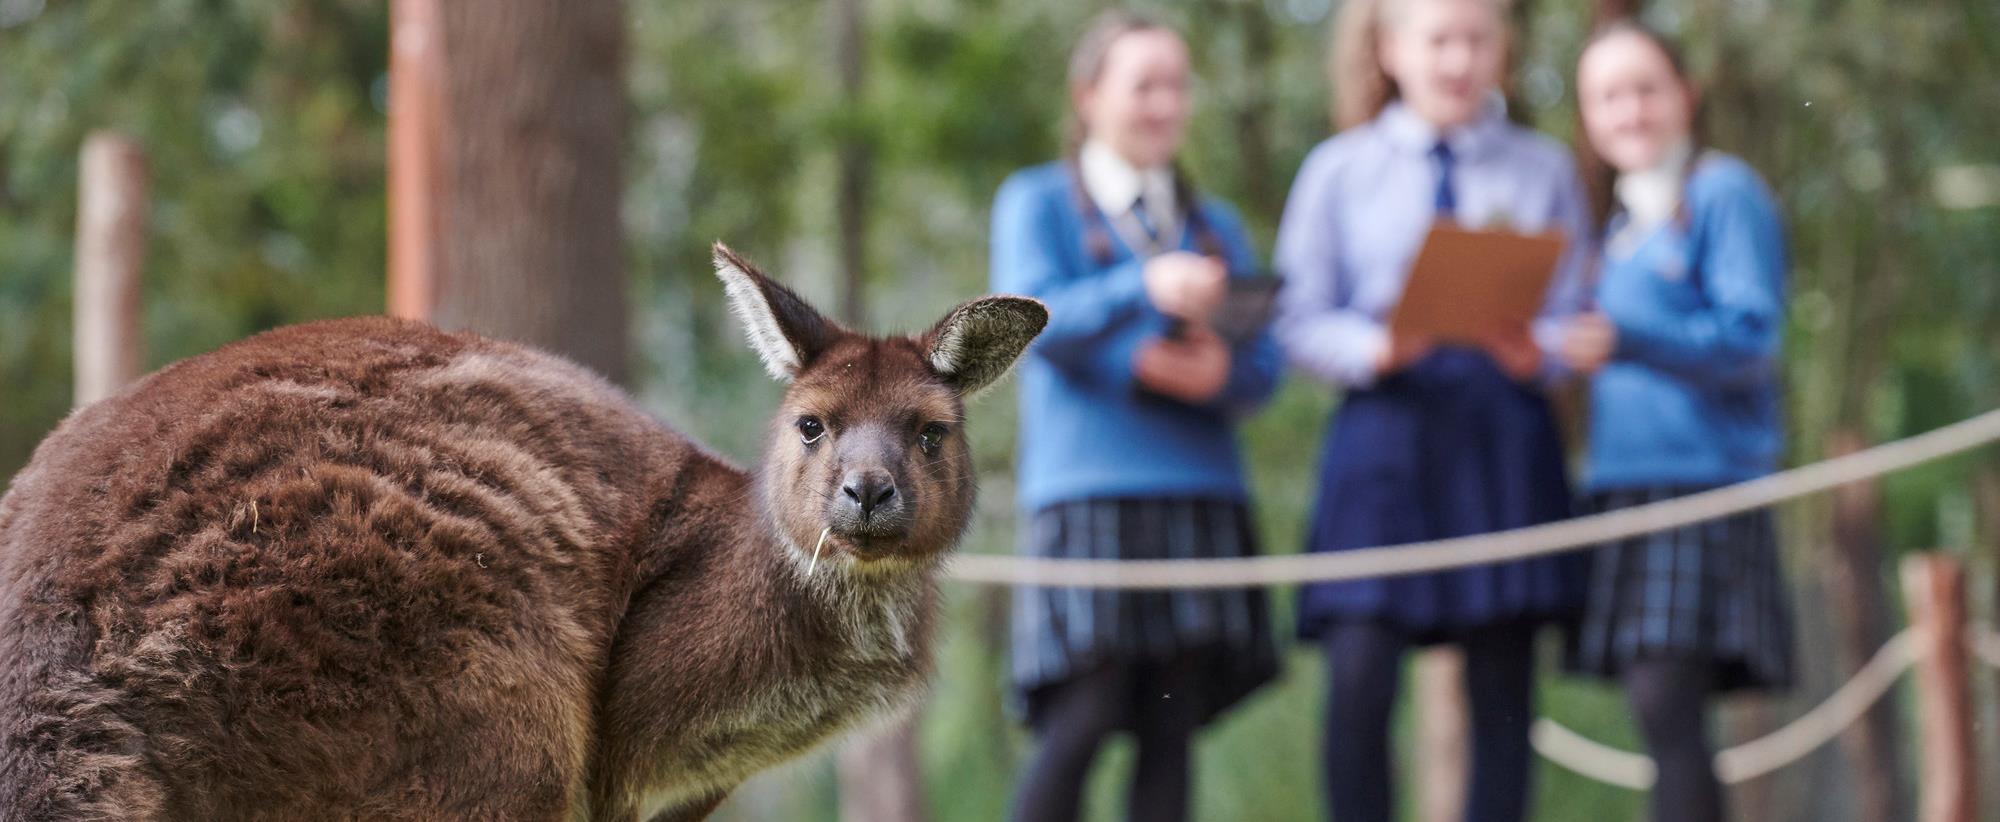 Kangaroo in foreground looking at camera while three students stand in background.